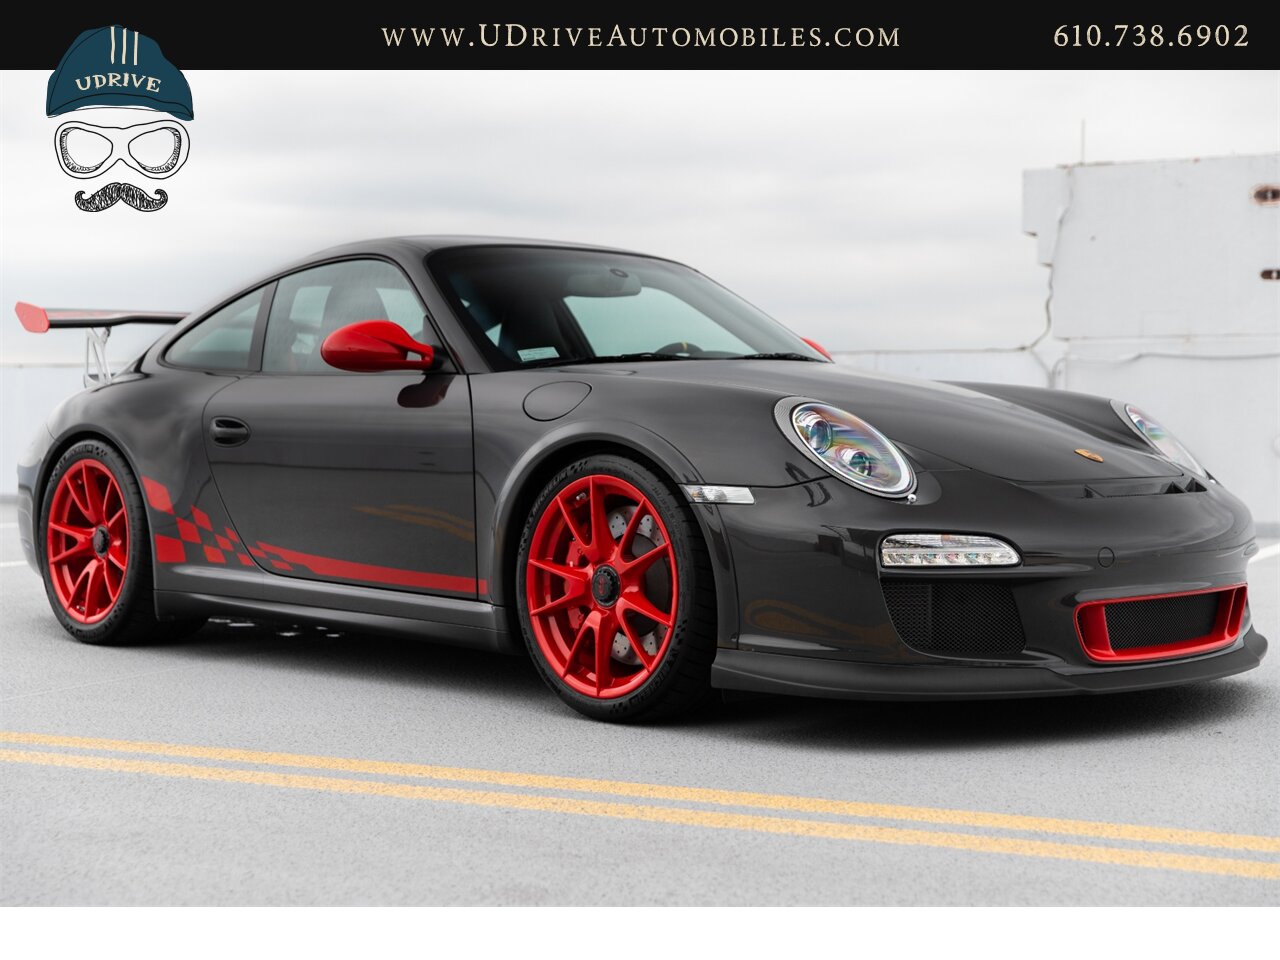 2010 Porsche 911 GT3 RS 1k Miles Dev Red Stitching Throughout  Front Axle Lift Sport Chrono 997.2 - Photo 19 - West Chester, PA 19382